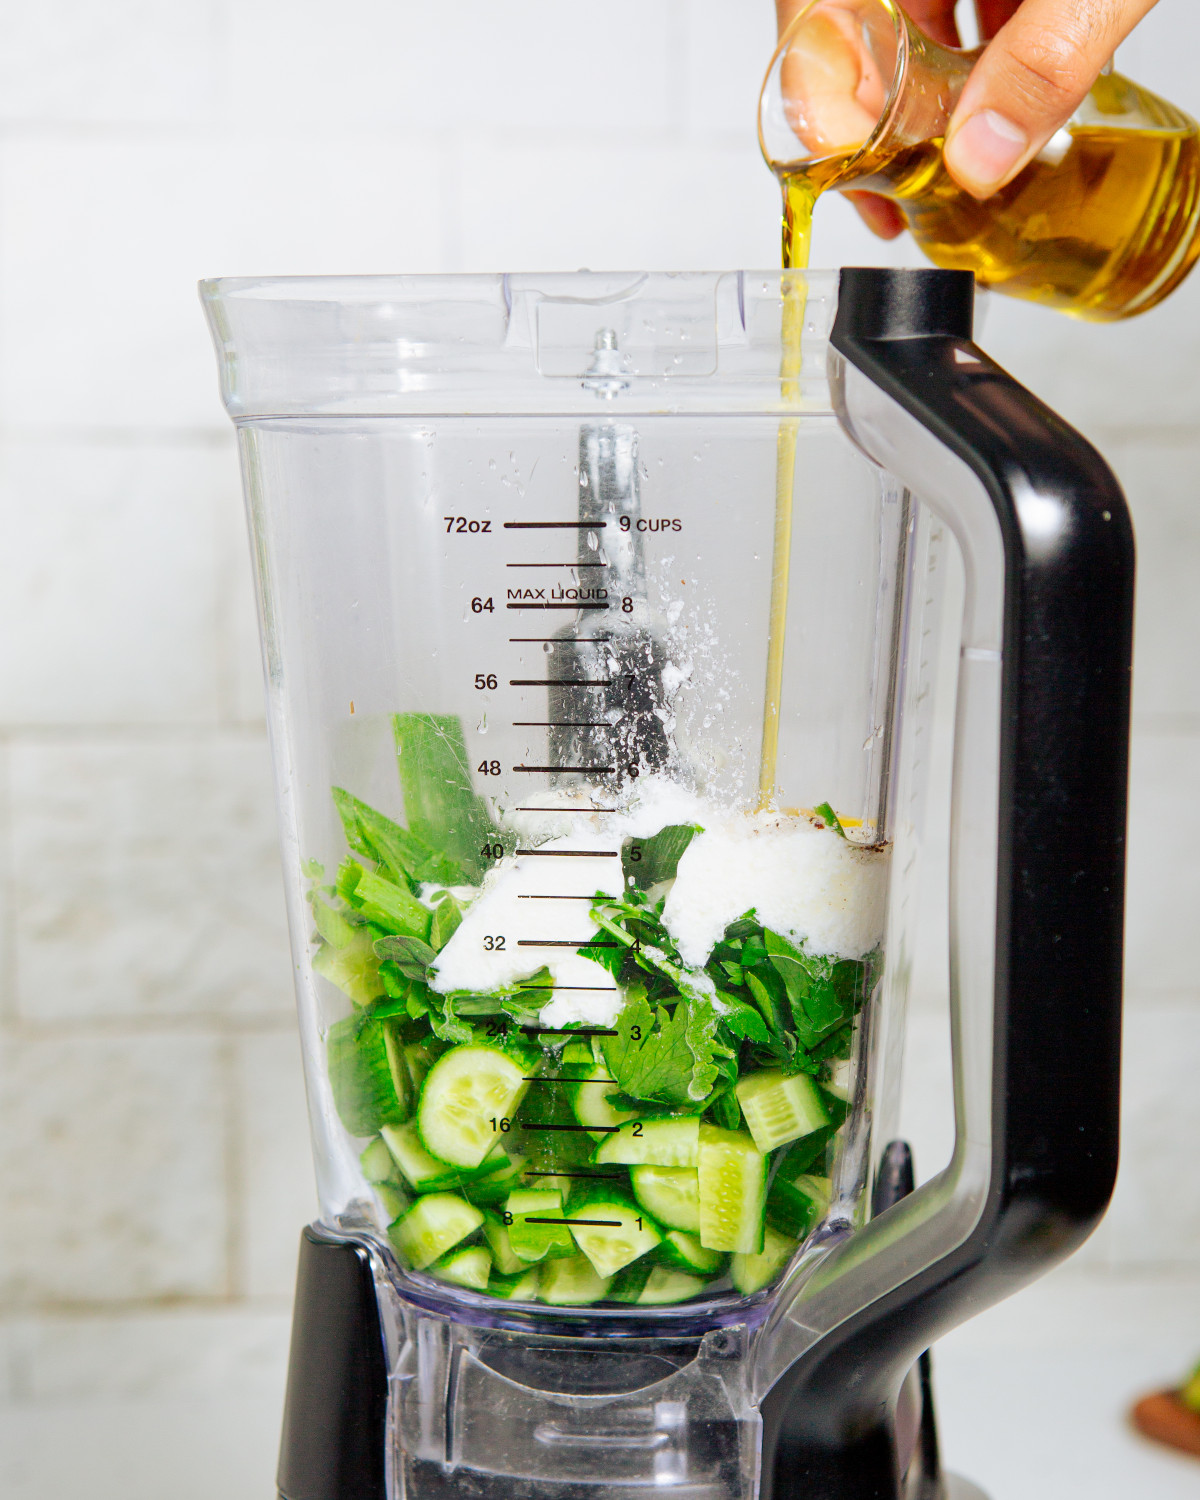 Ingredients for cold cucumber soup being added to a blender pitcher.